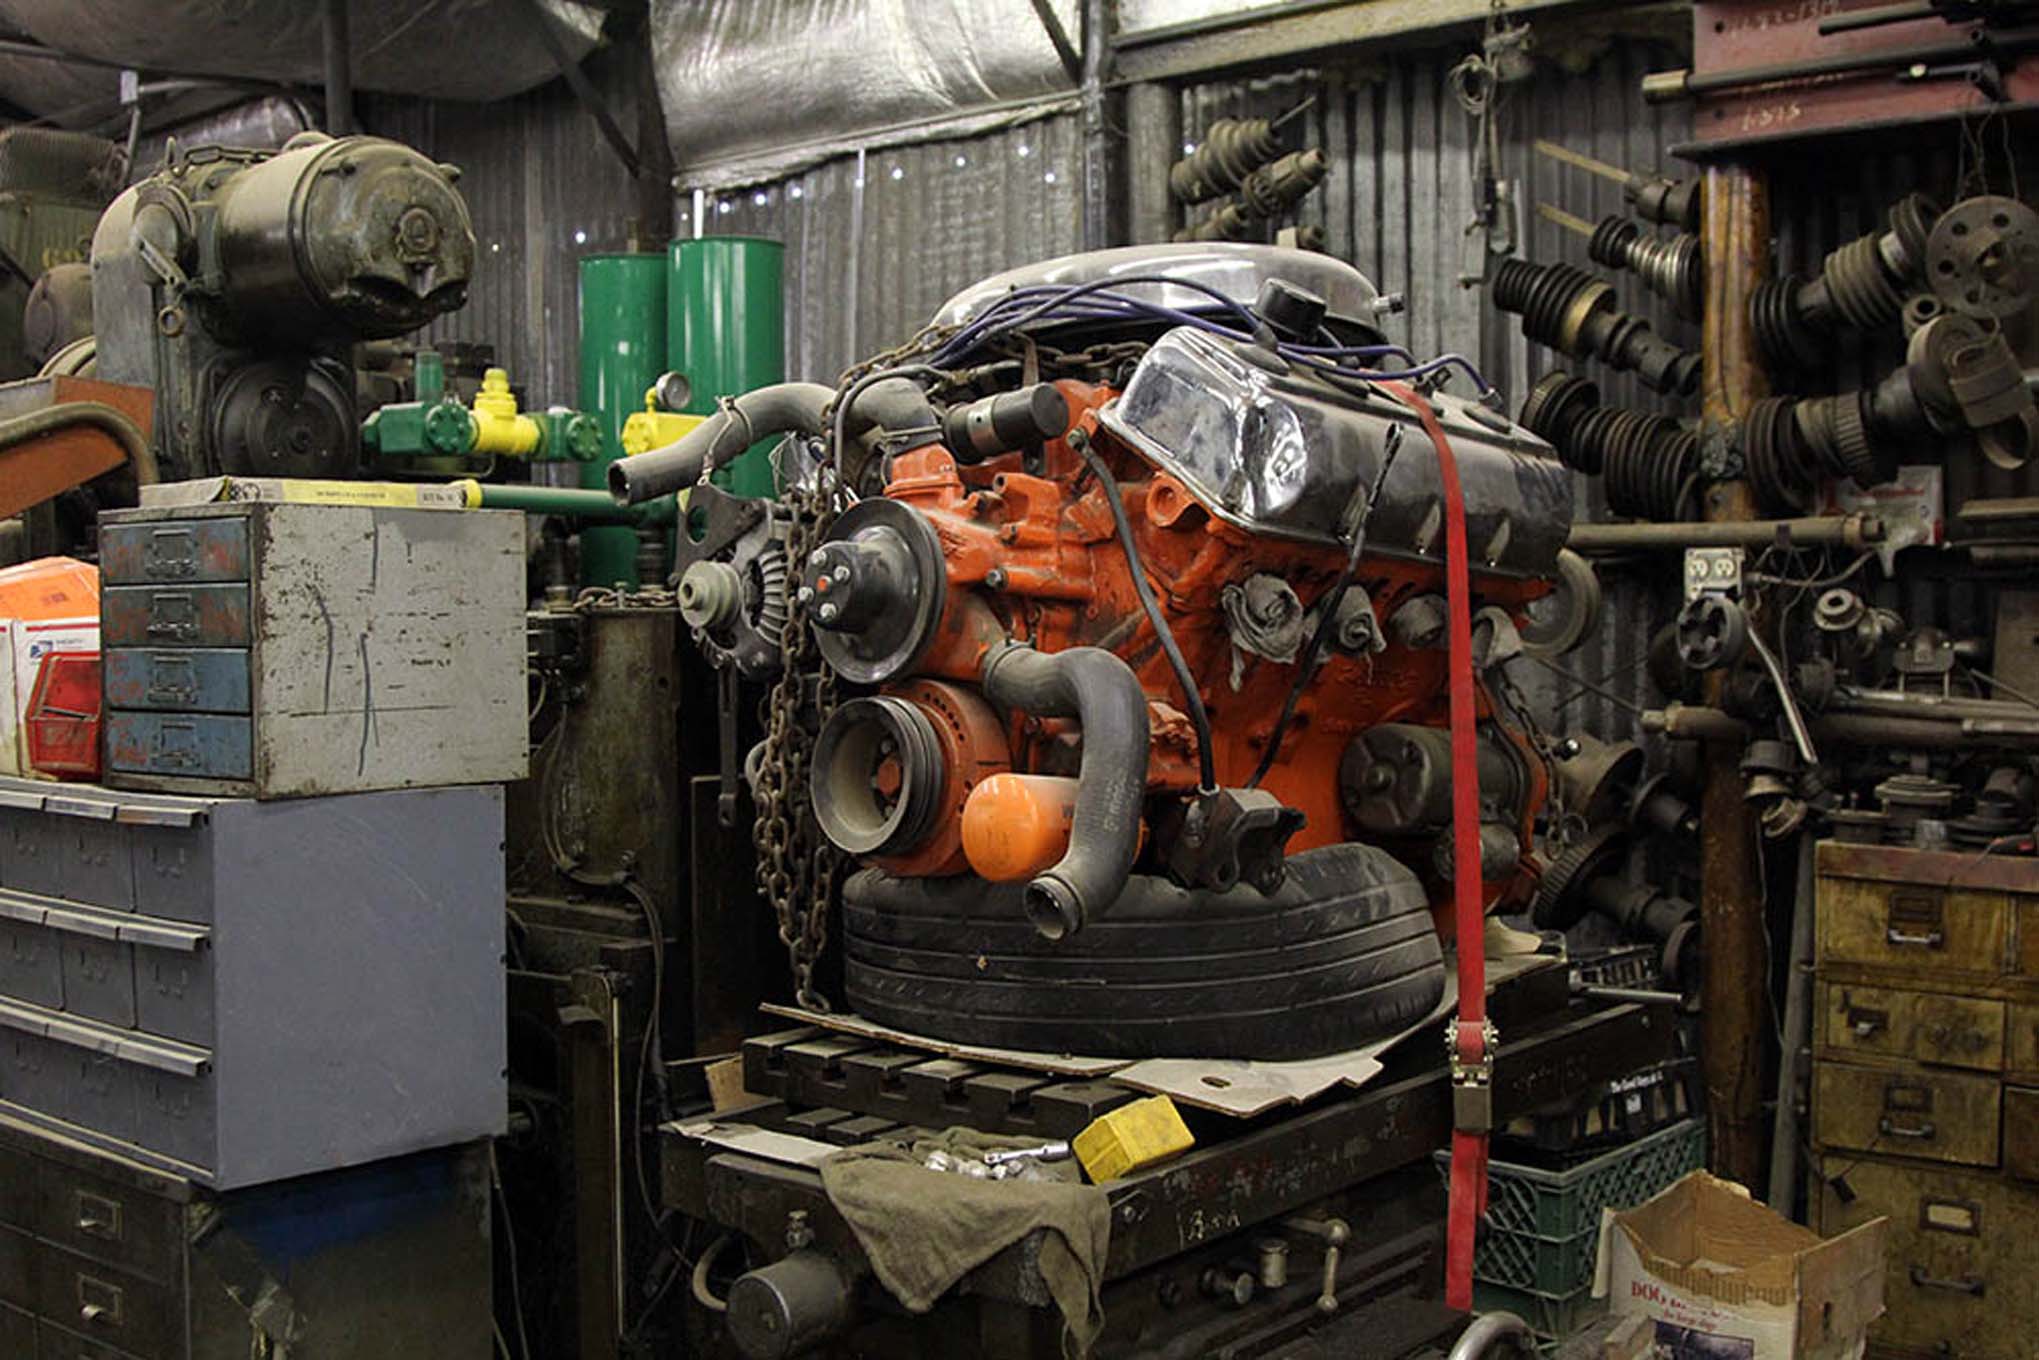 The Most Amazing (Secret) Machine Shop in the World - Hot Rod Network